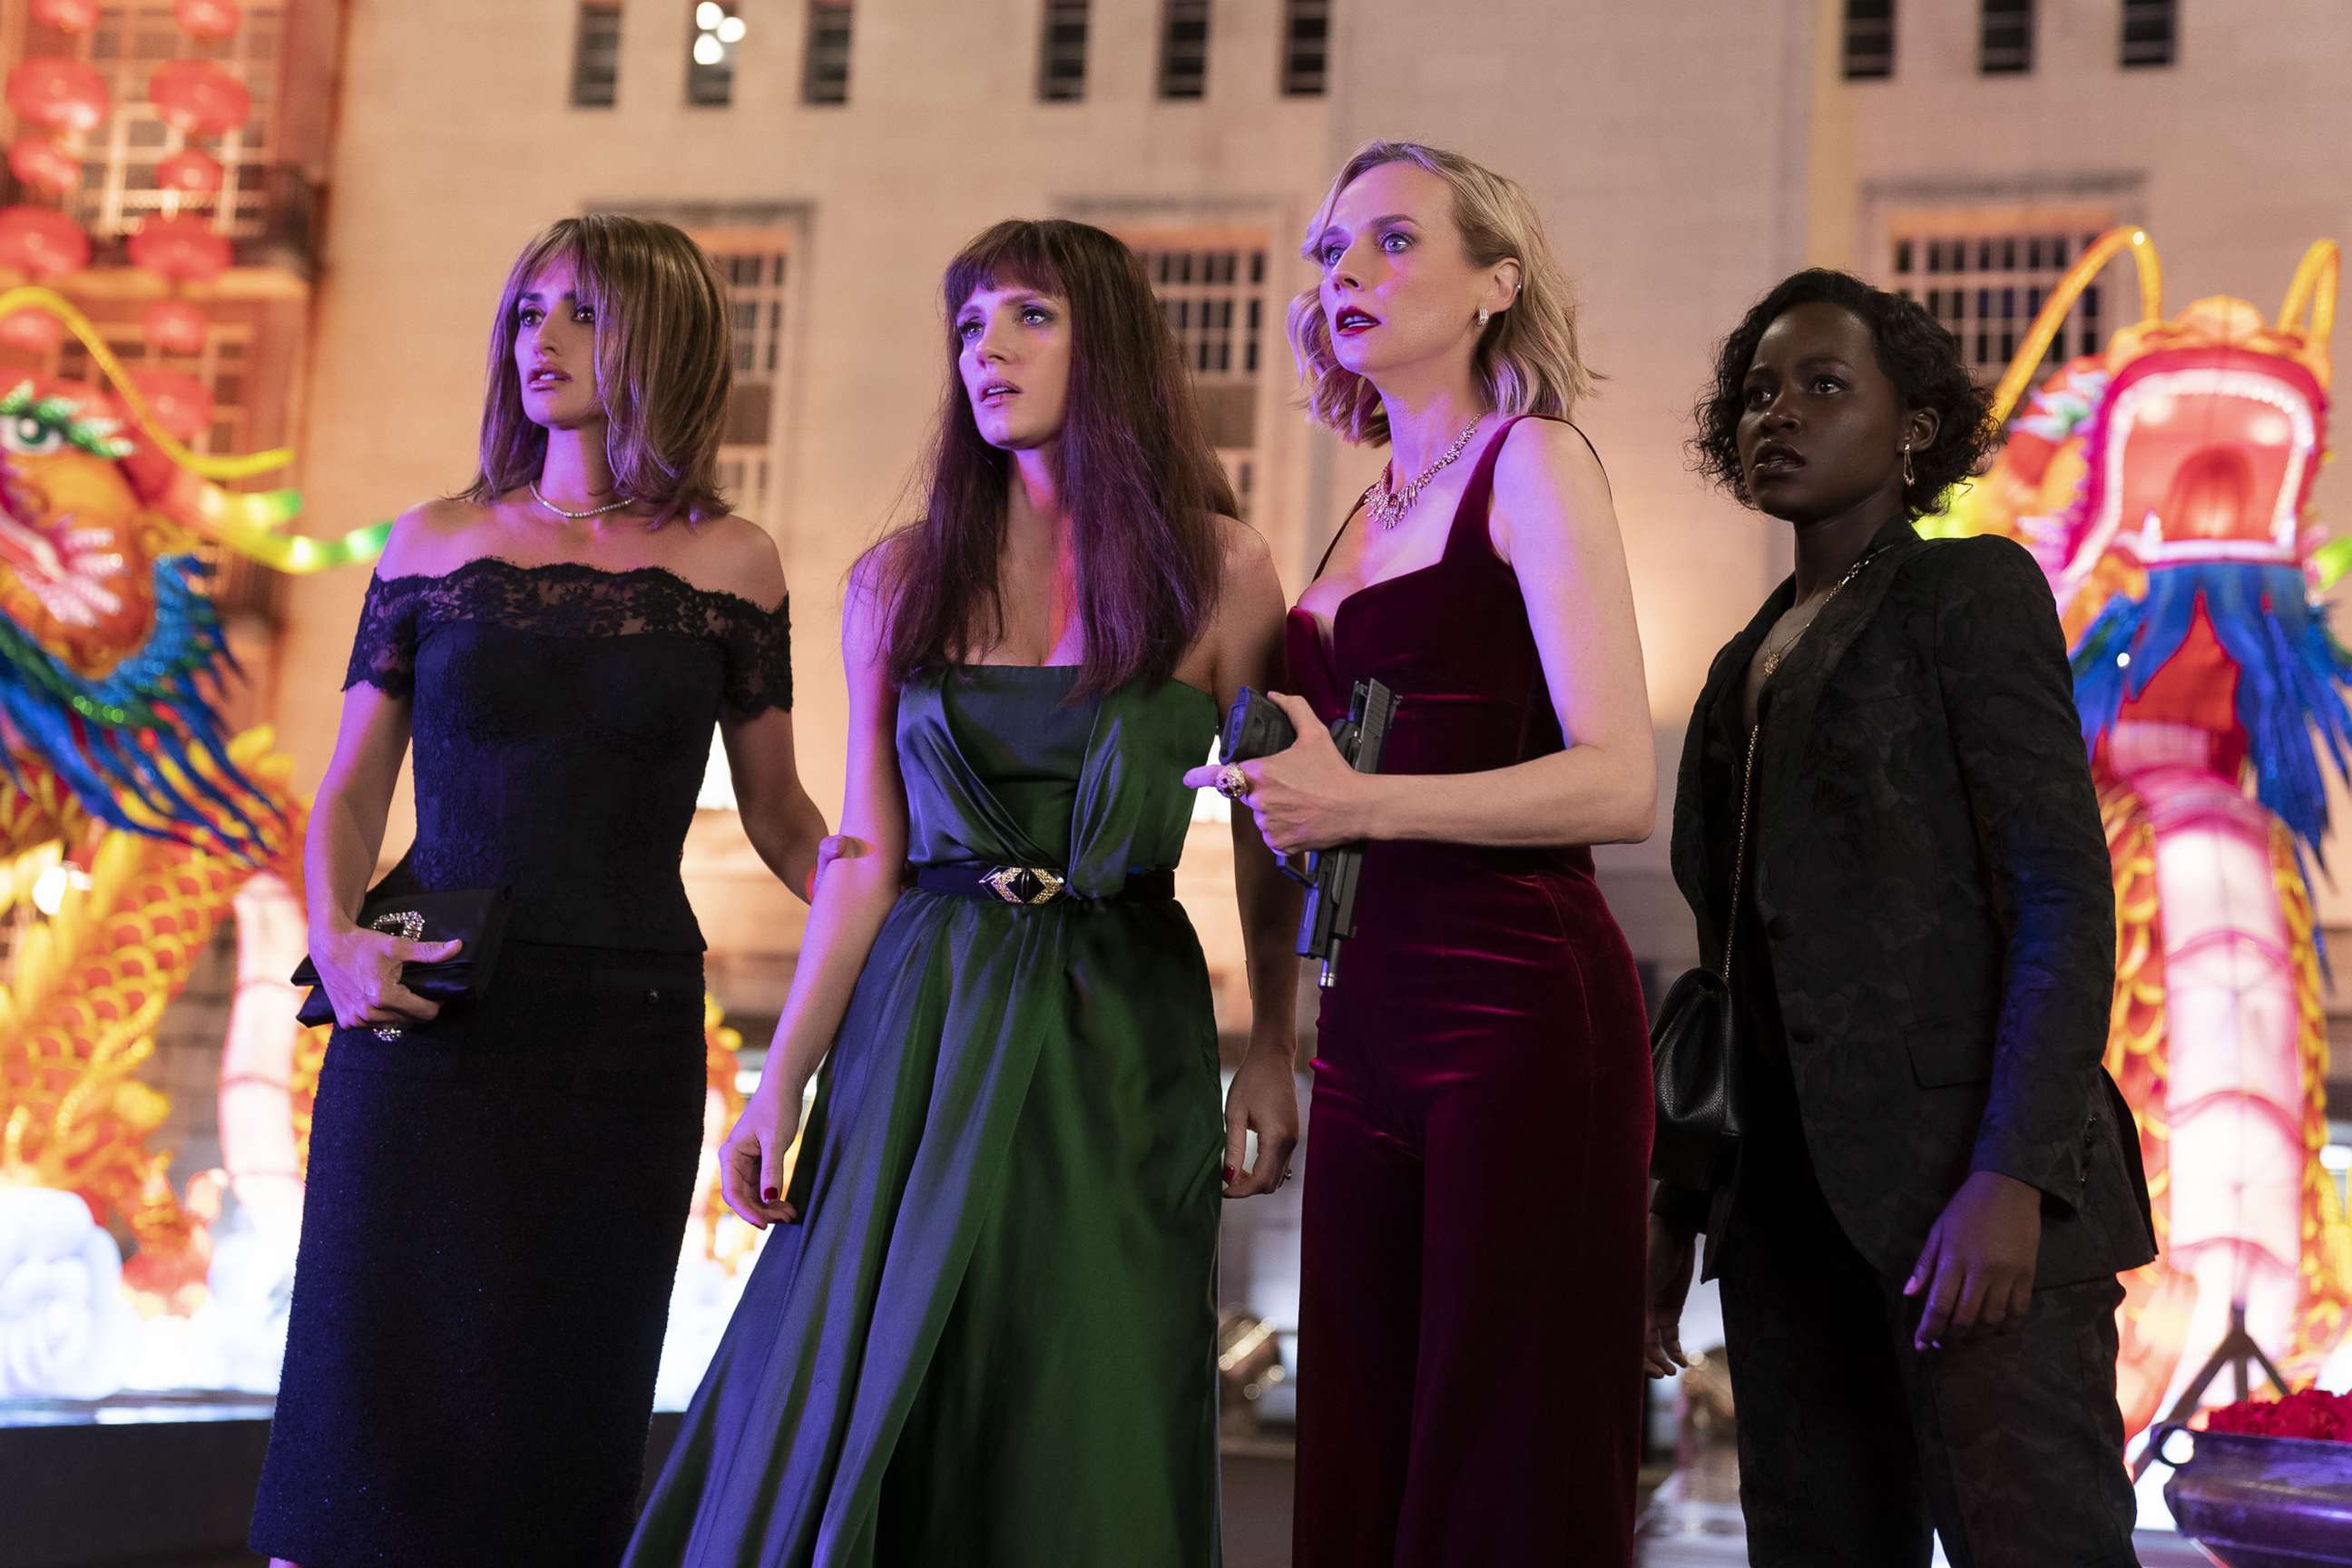 PHOTO: Graciela (Penélope Cruz), Mason "Mace" Brown (Jessica Chastain), Marie (Diane Kruger) and Khadijah (Lupita Nyong'o) in a scene in "The 355" movie.